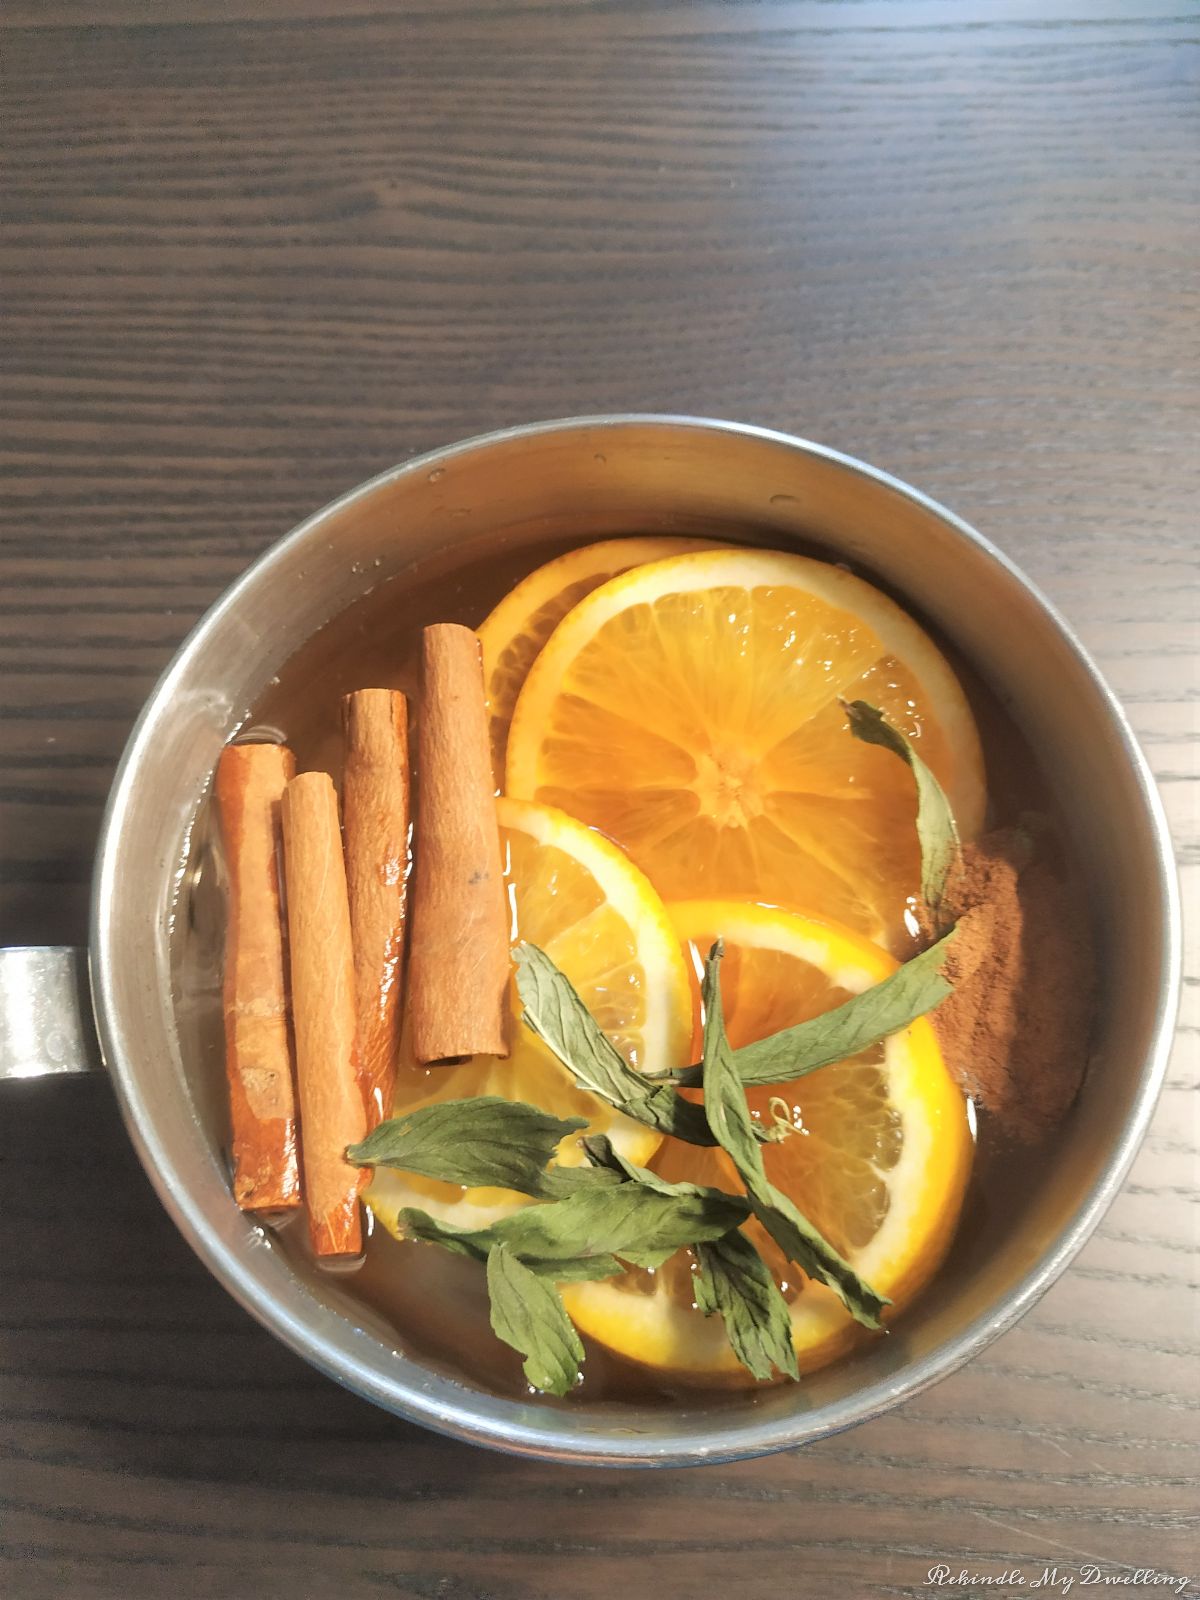 Pot filled with orange slices, cinnamon, mint and vanilla.